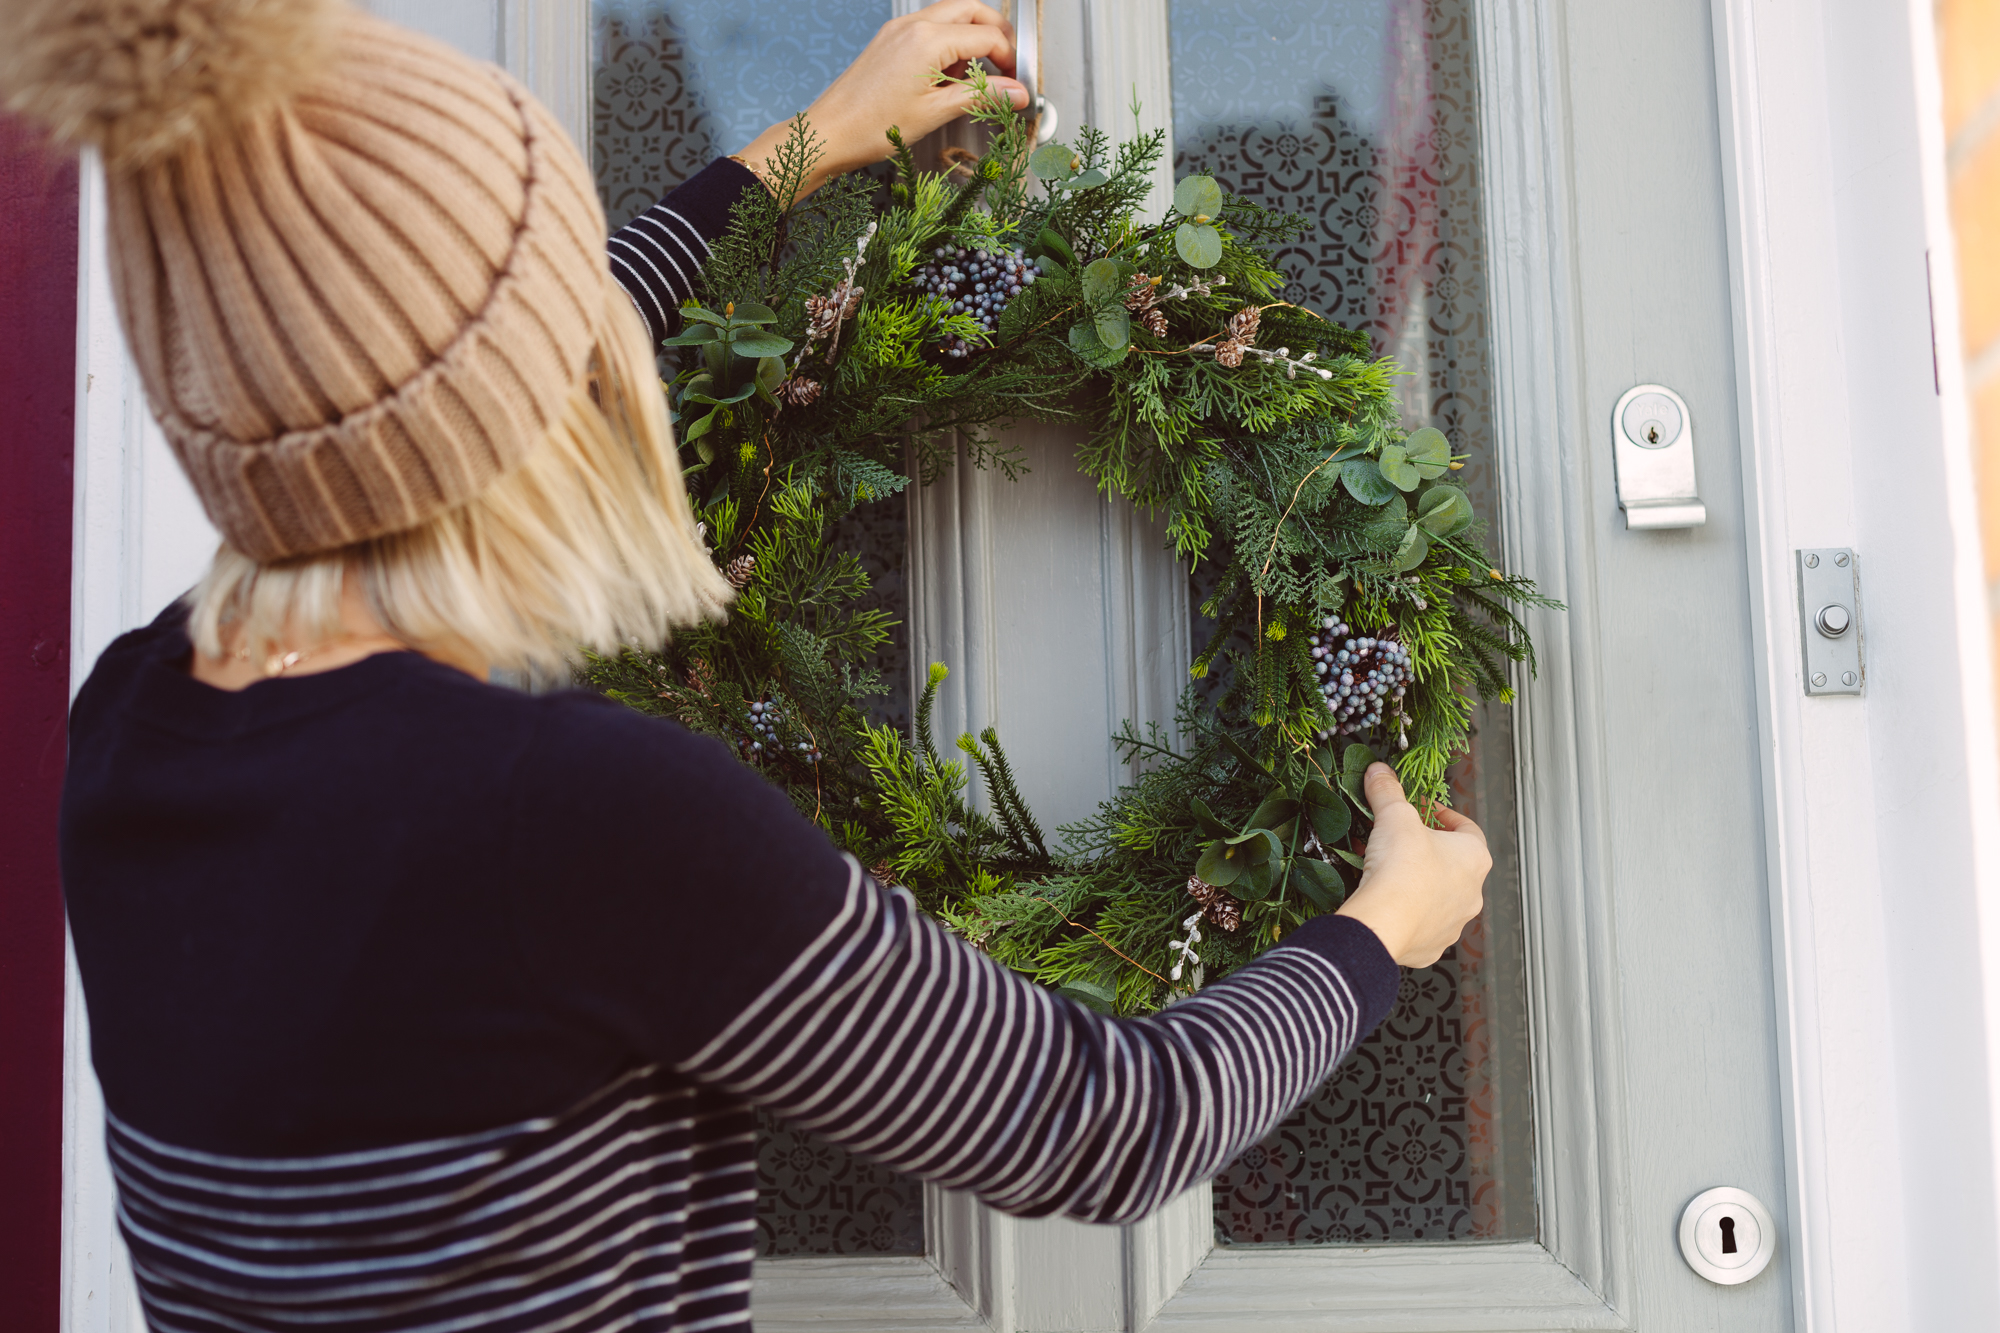 5 steps to feeling festive (when your head’s not there yet)